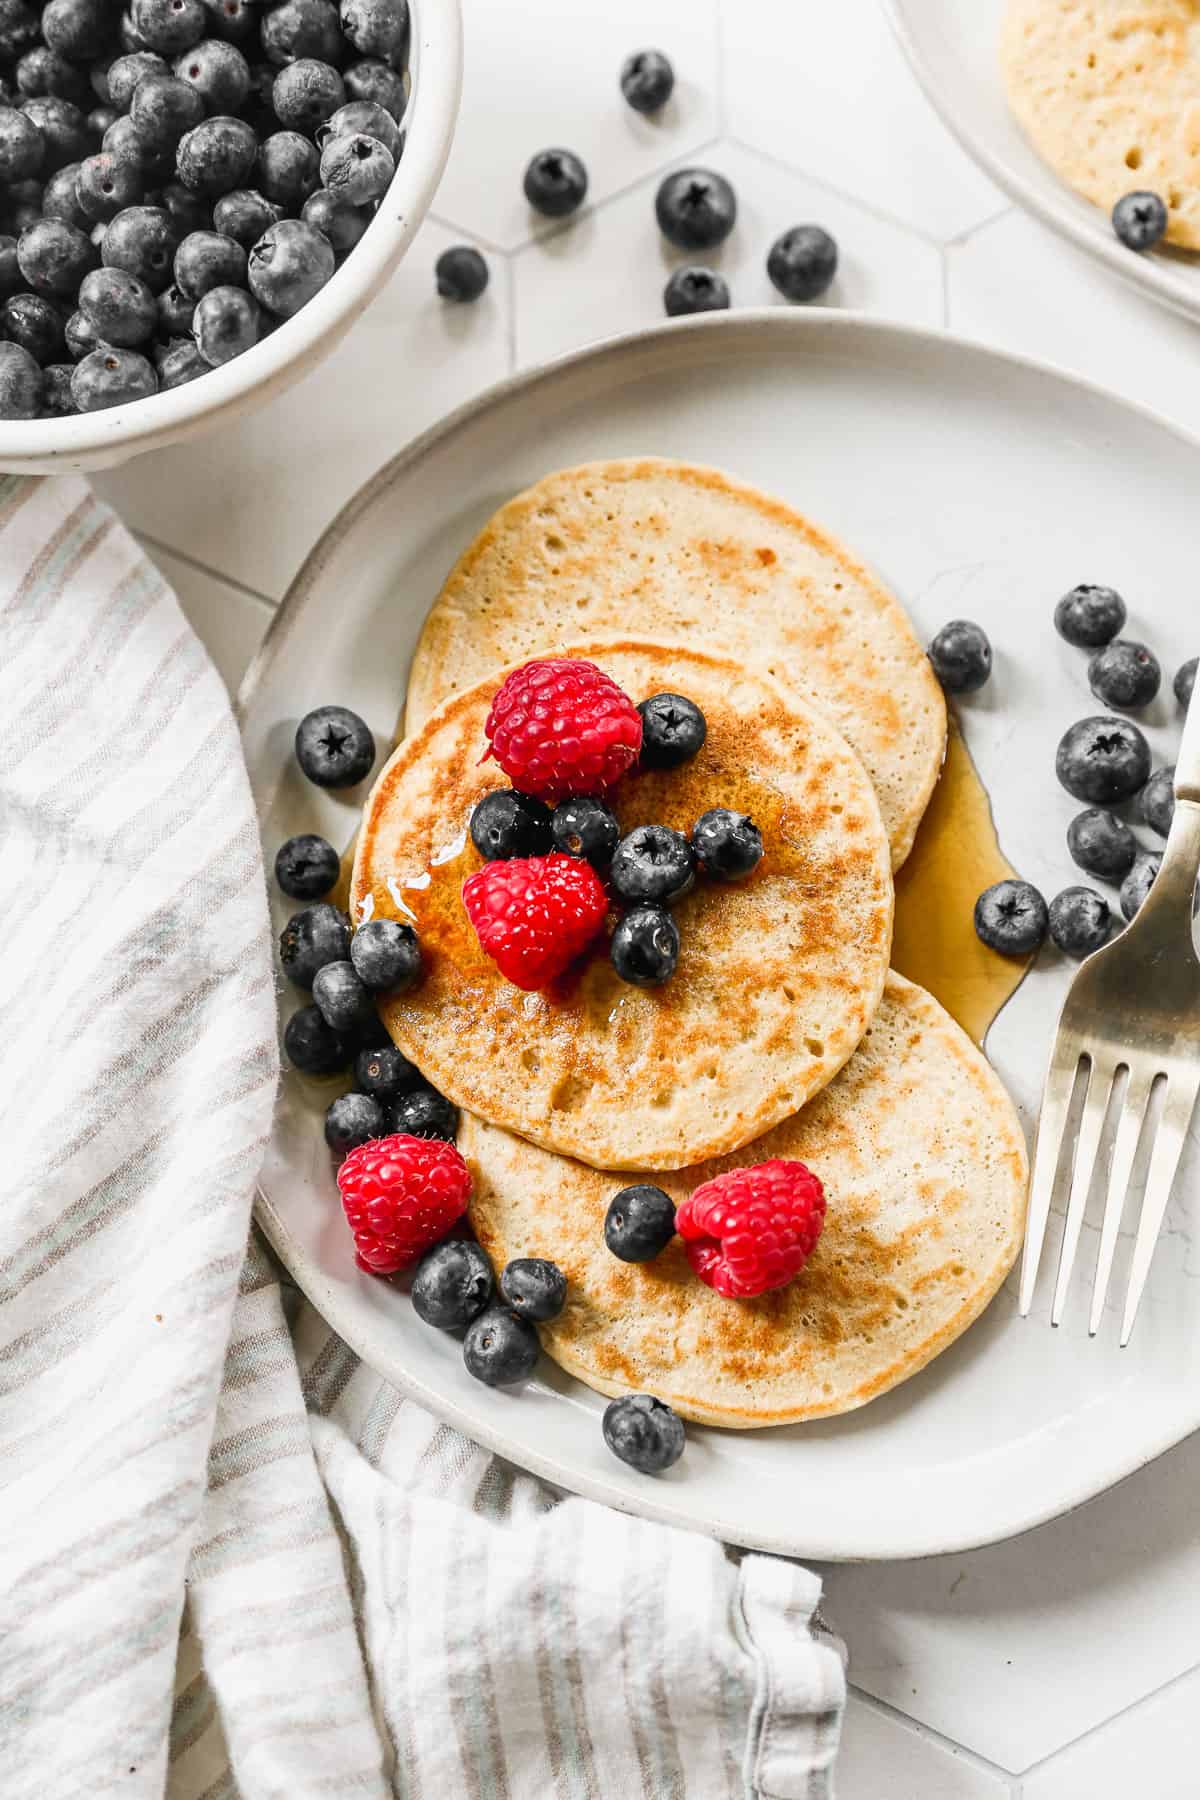 Three easy Cottage Cheese Pancakes on a plate with blueberries and raspberries, drizzled with maple syrup.